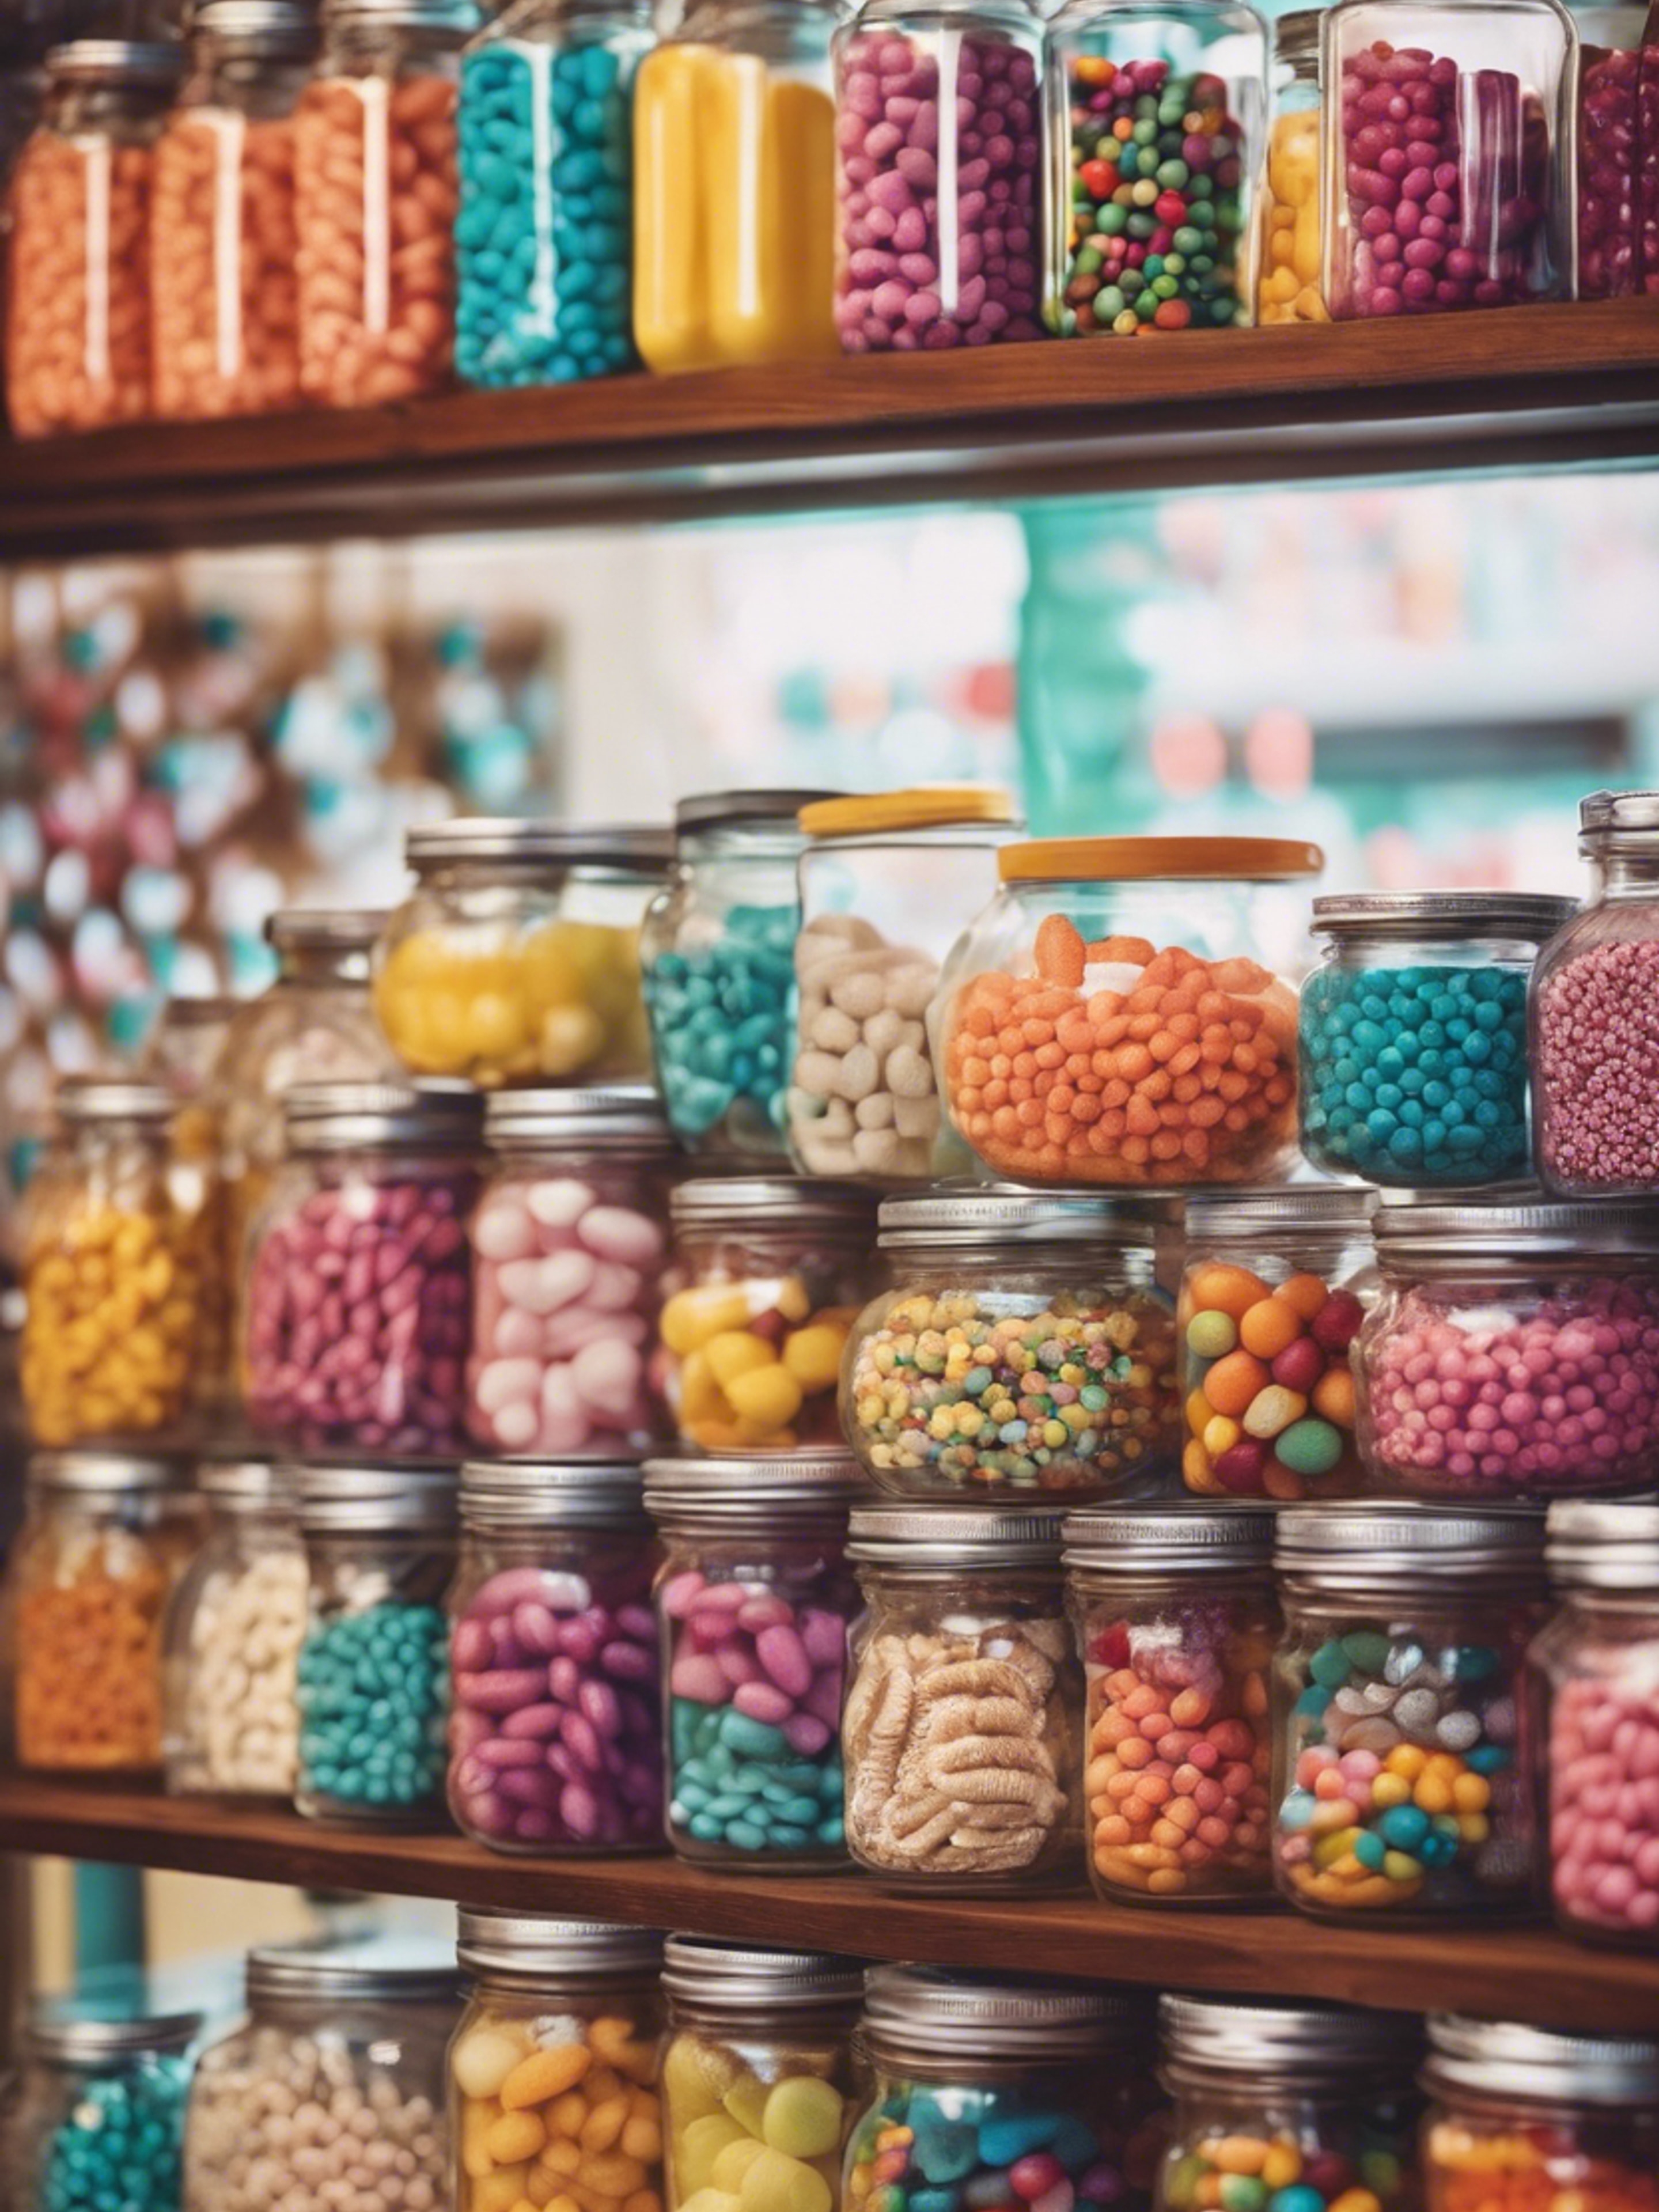 Retro candy store filled with jars of colorful treats. 牆紙[53bdbe1ef5c6451abca1]